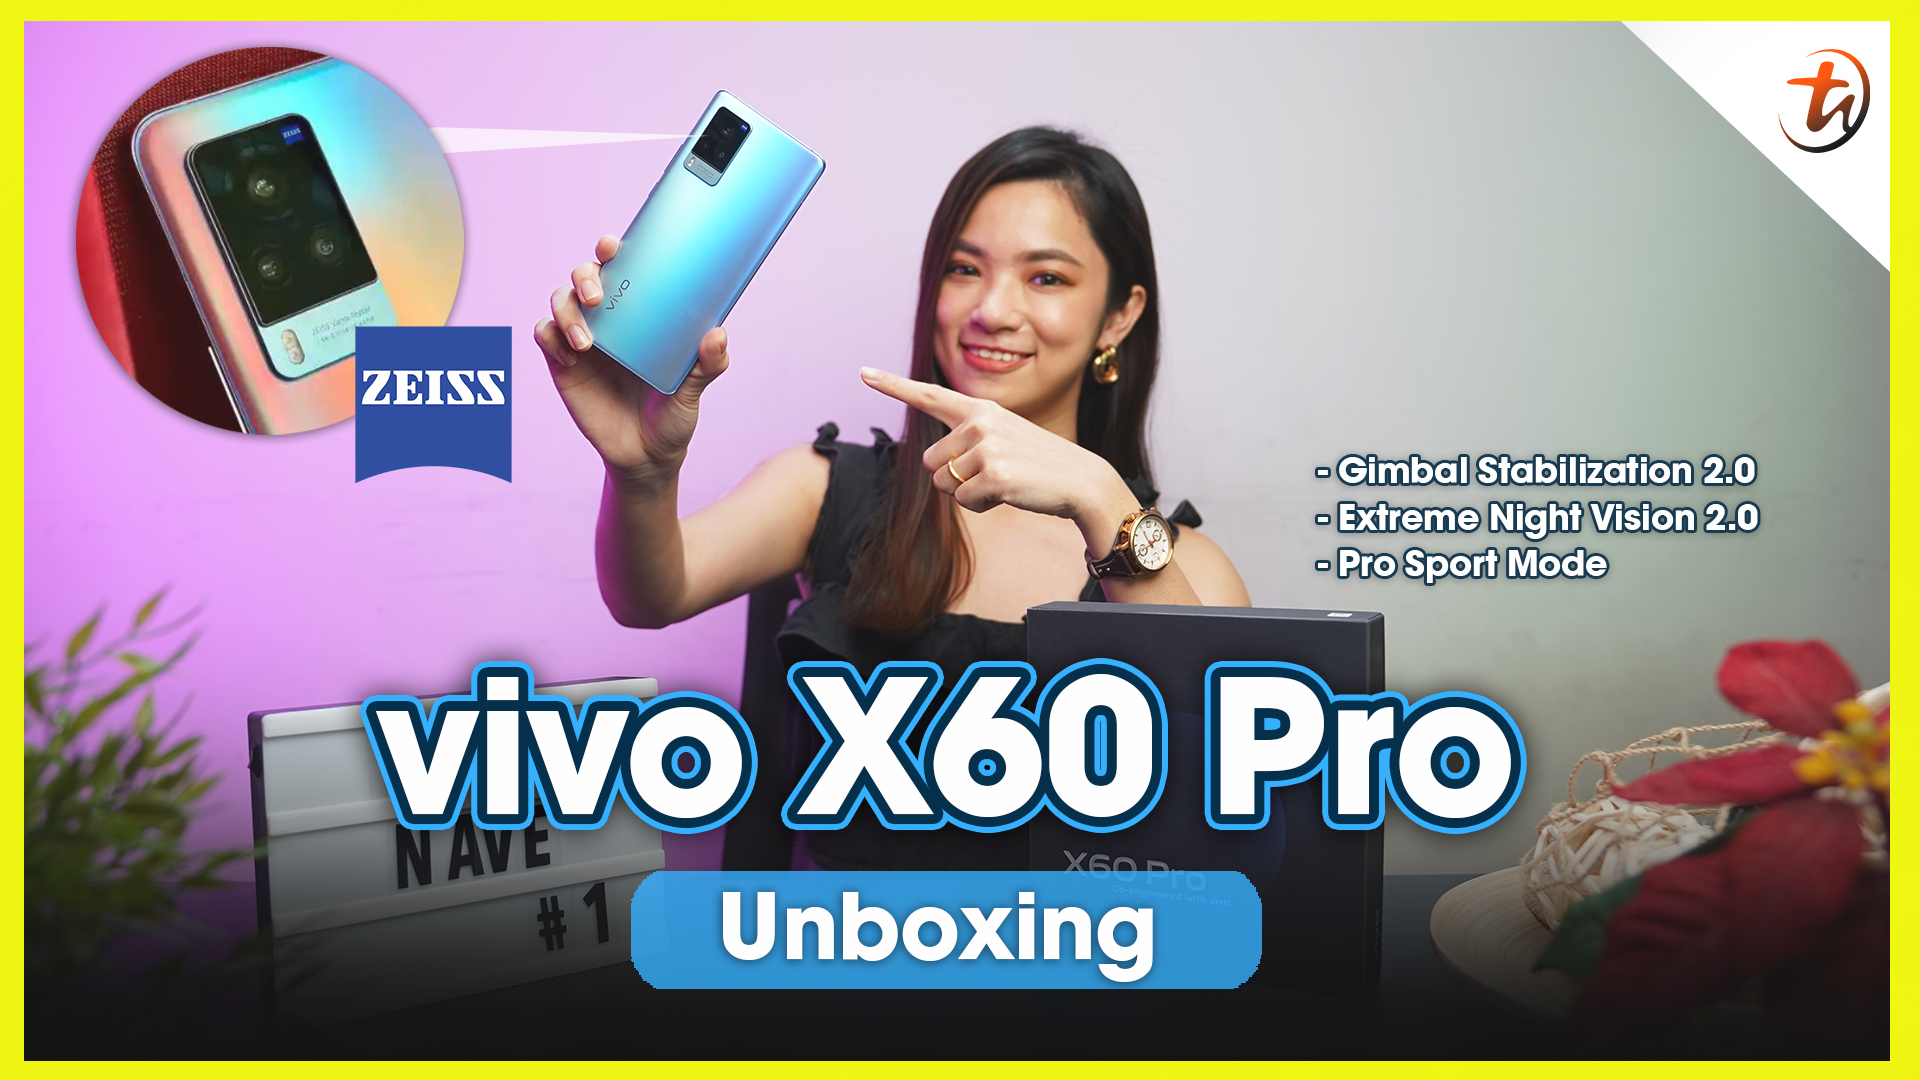 vivo X60 Pro - Smartphone or Camera? | TechNave Unboxing and Hands-On Video